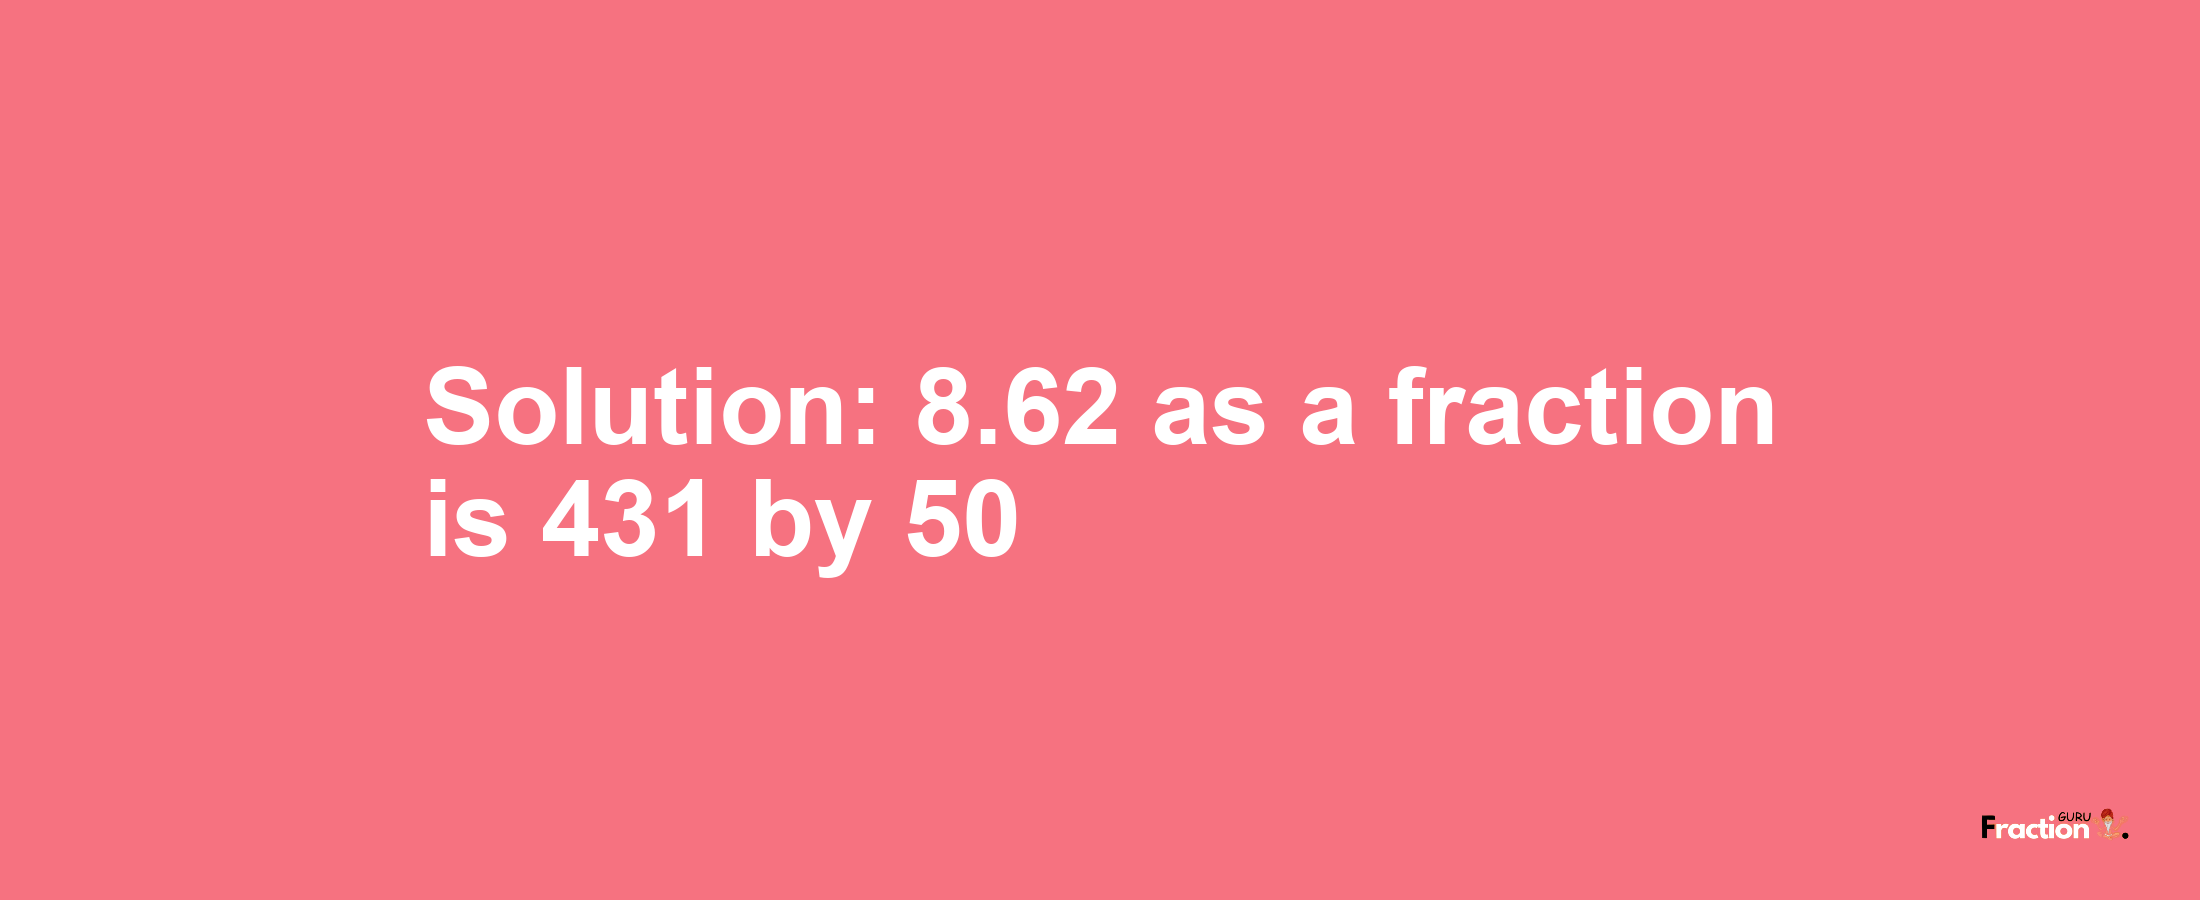 Solution:8.62 as a fraction is 431/50